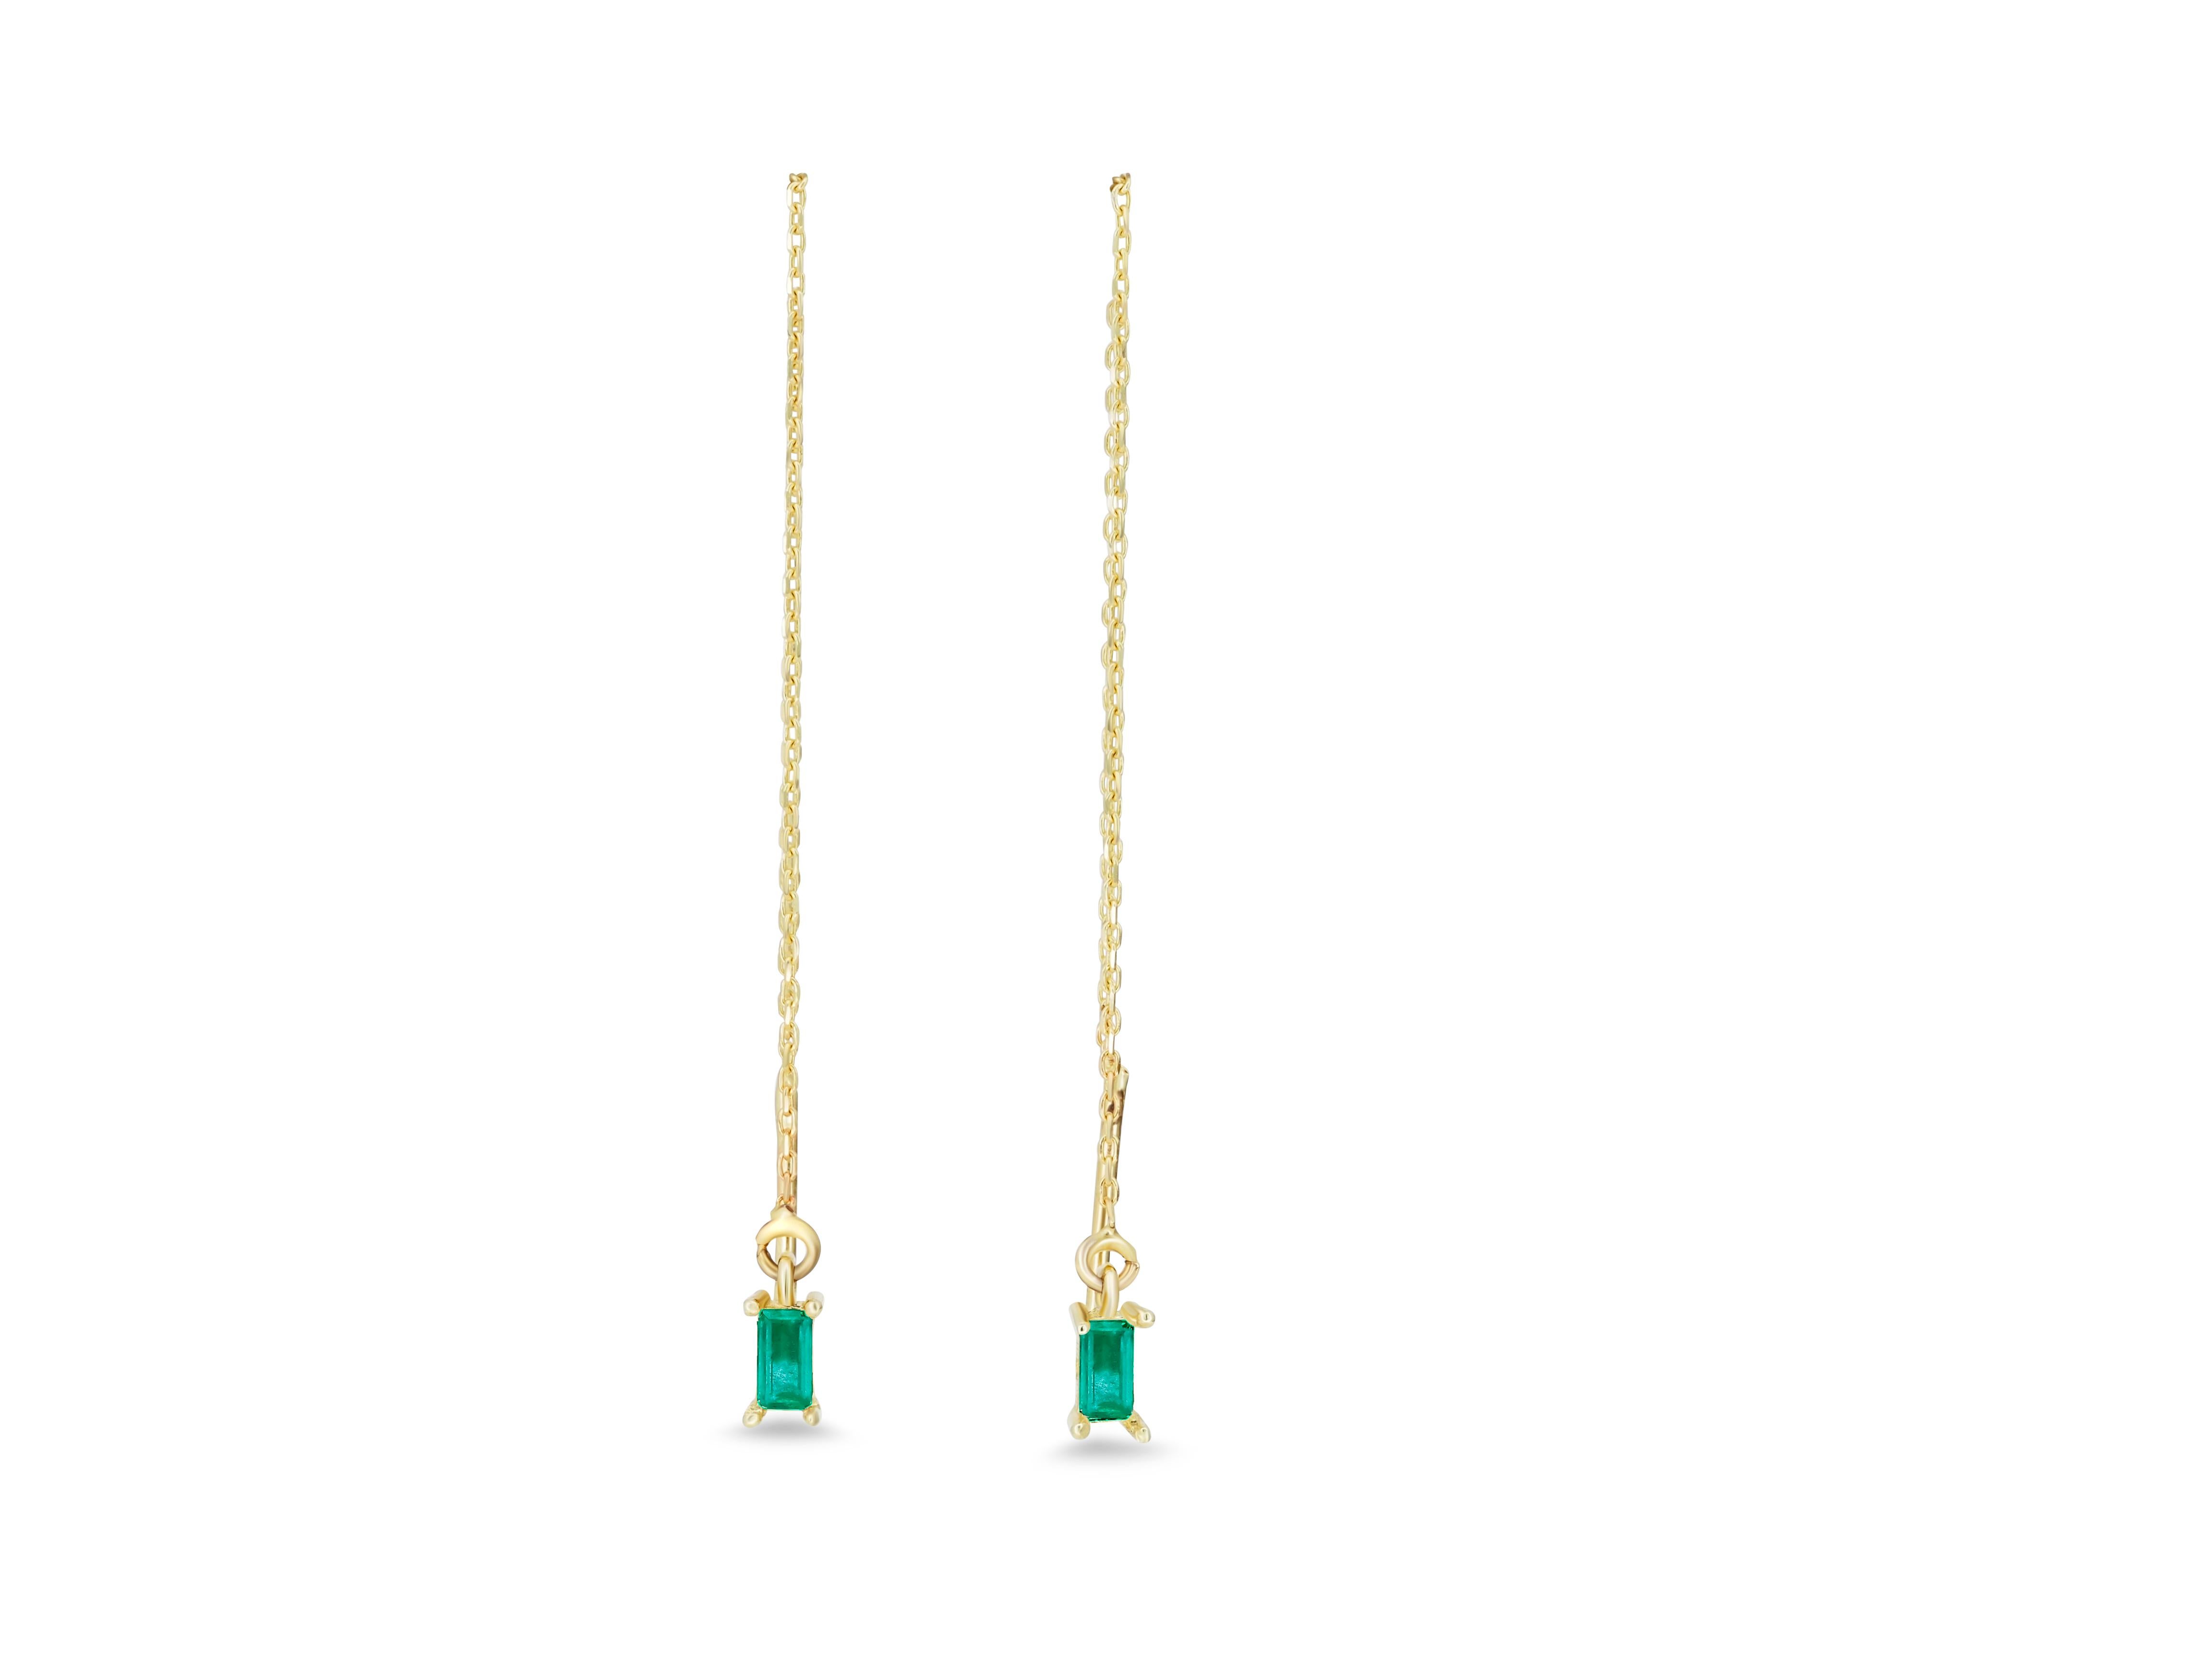 Baguette Cut 14k Solid Gold Drop Earrings with emerald.  For Sale